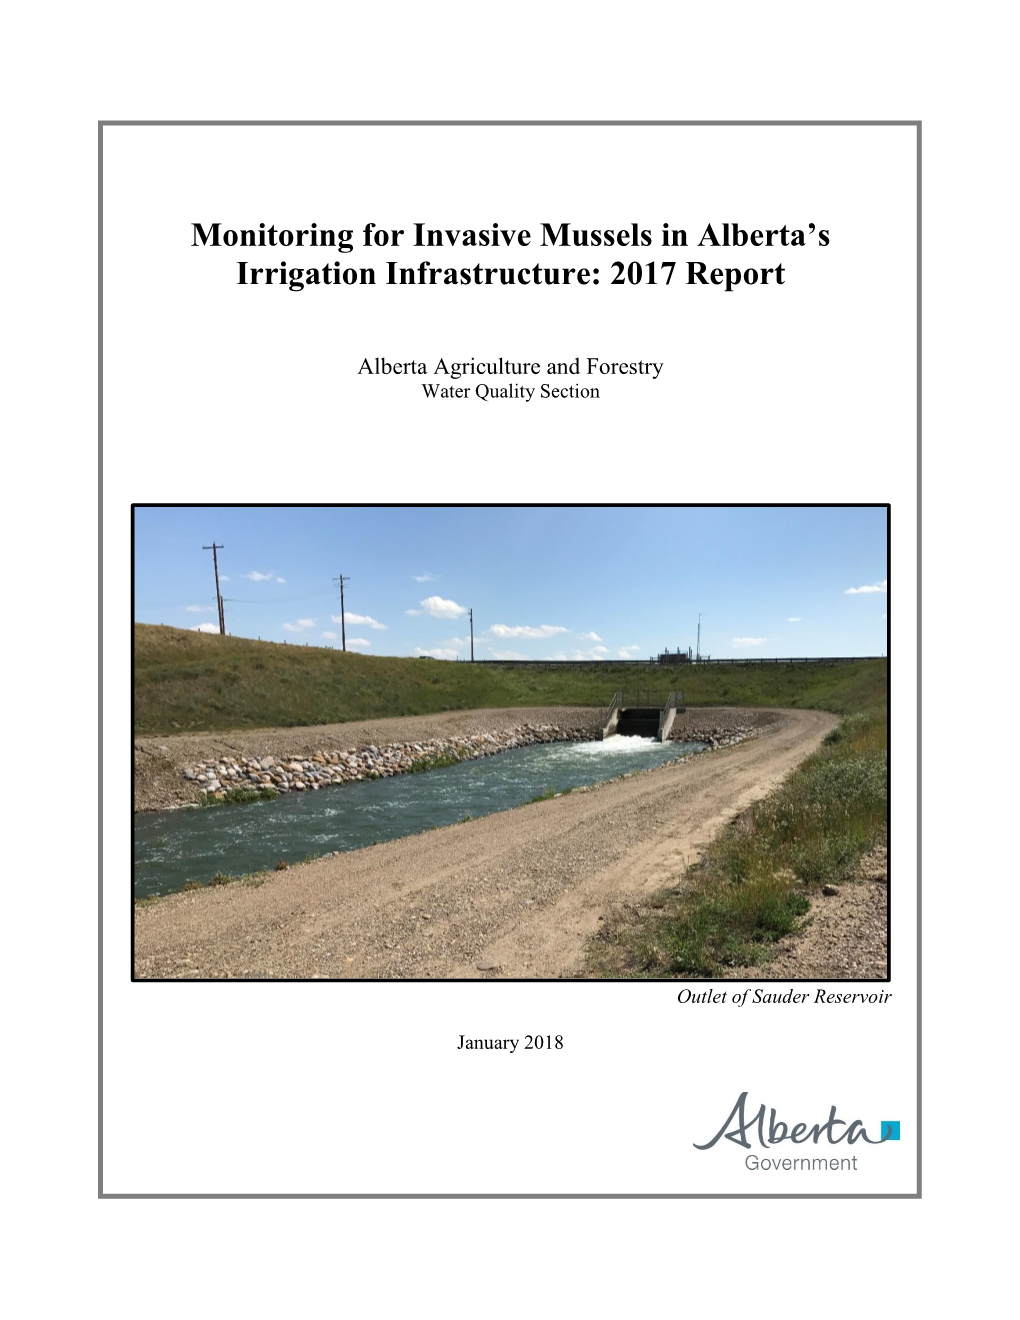 Monitoring for Invasive Mussels in Alberta’S Irrigation Infrastructure: 2017 Report